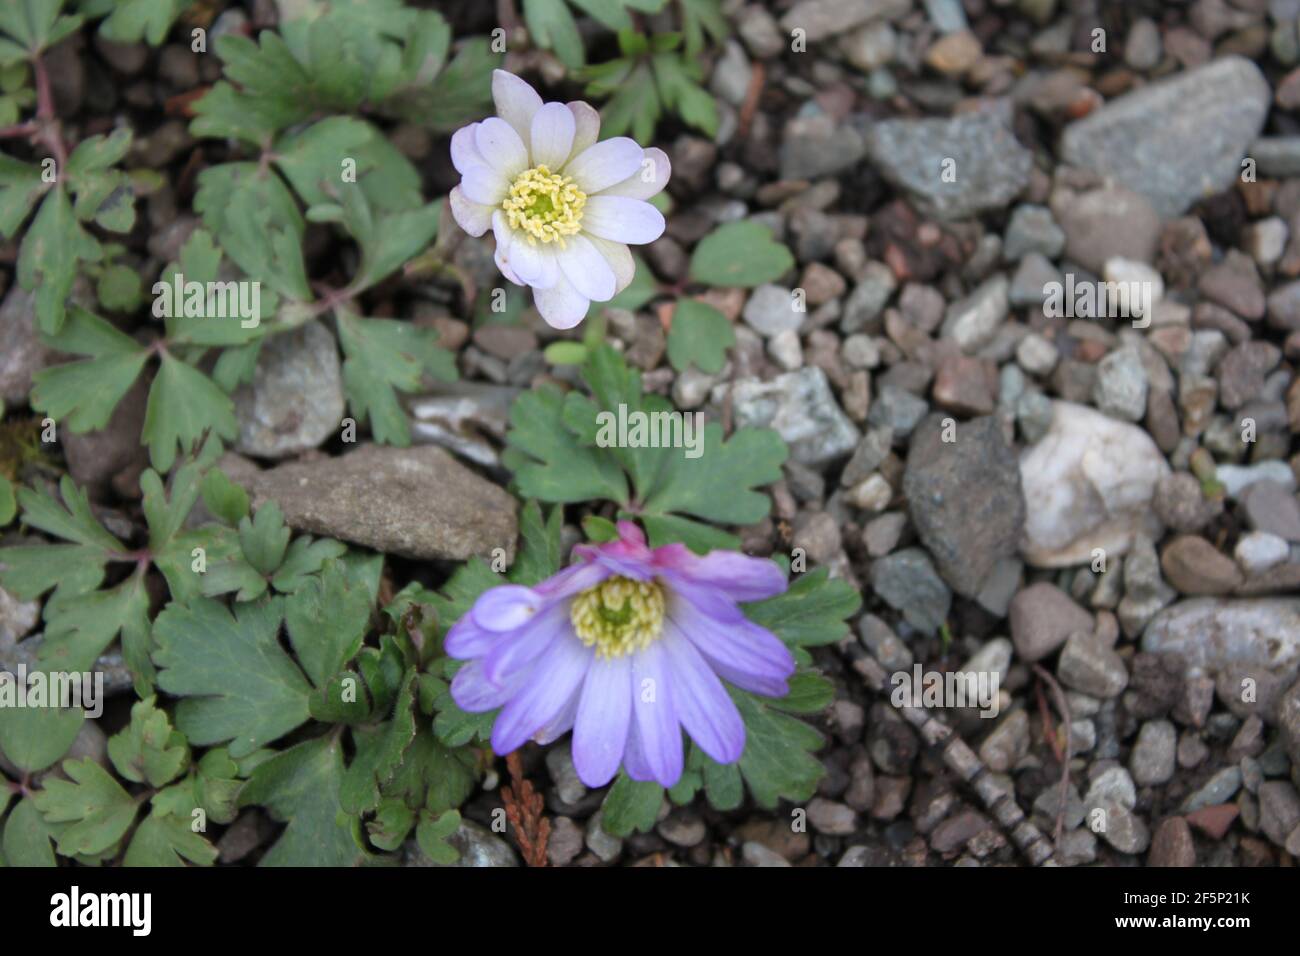 Delicate violet flowers with yellow centres. Anemone Blanda pretty daisy like flowers growing on walking paths. Winter windflower blue blooms, UK. Stock Photo